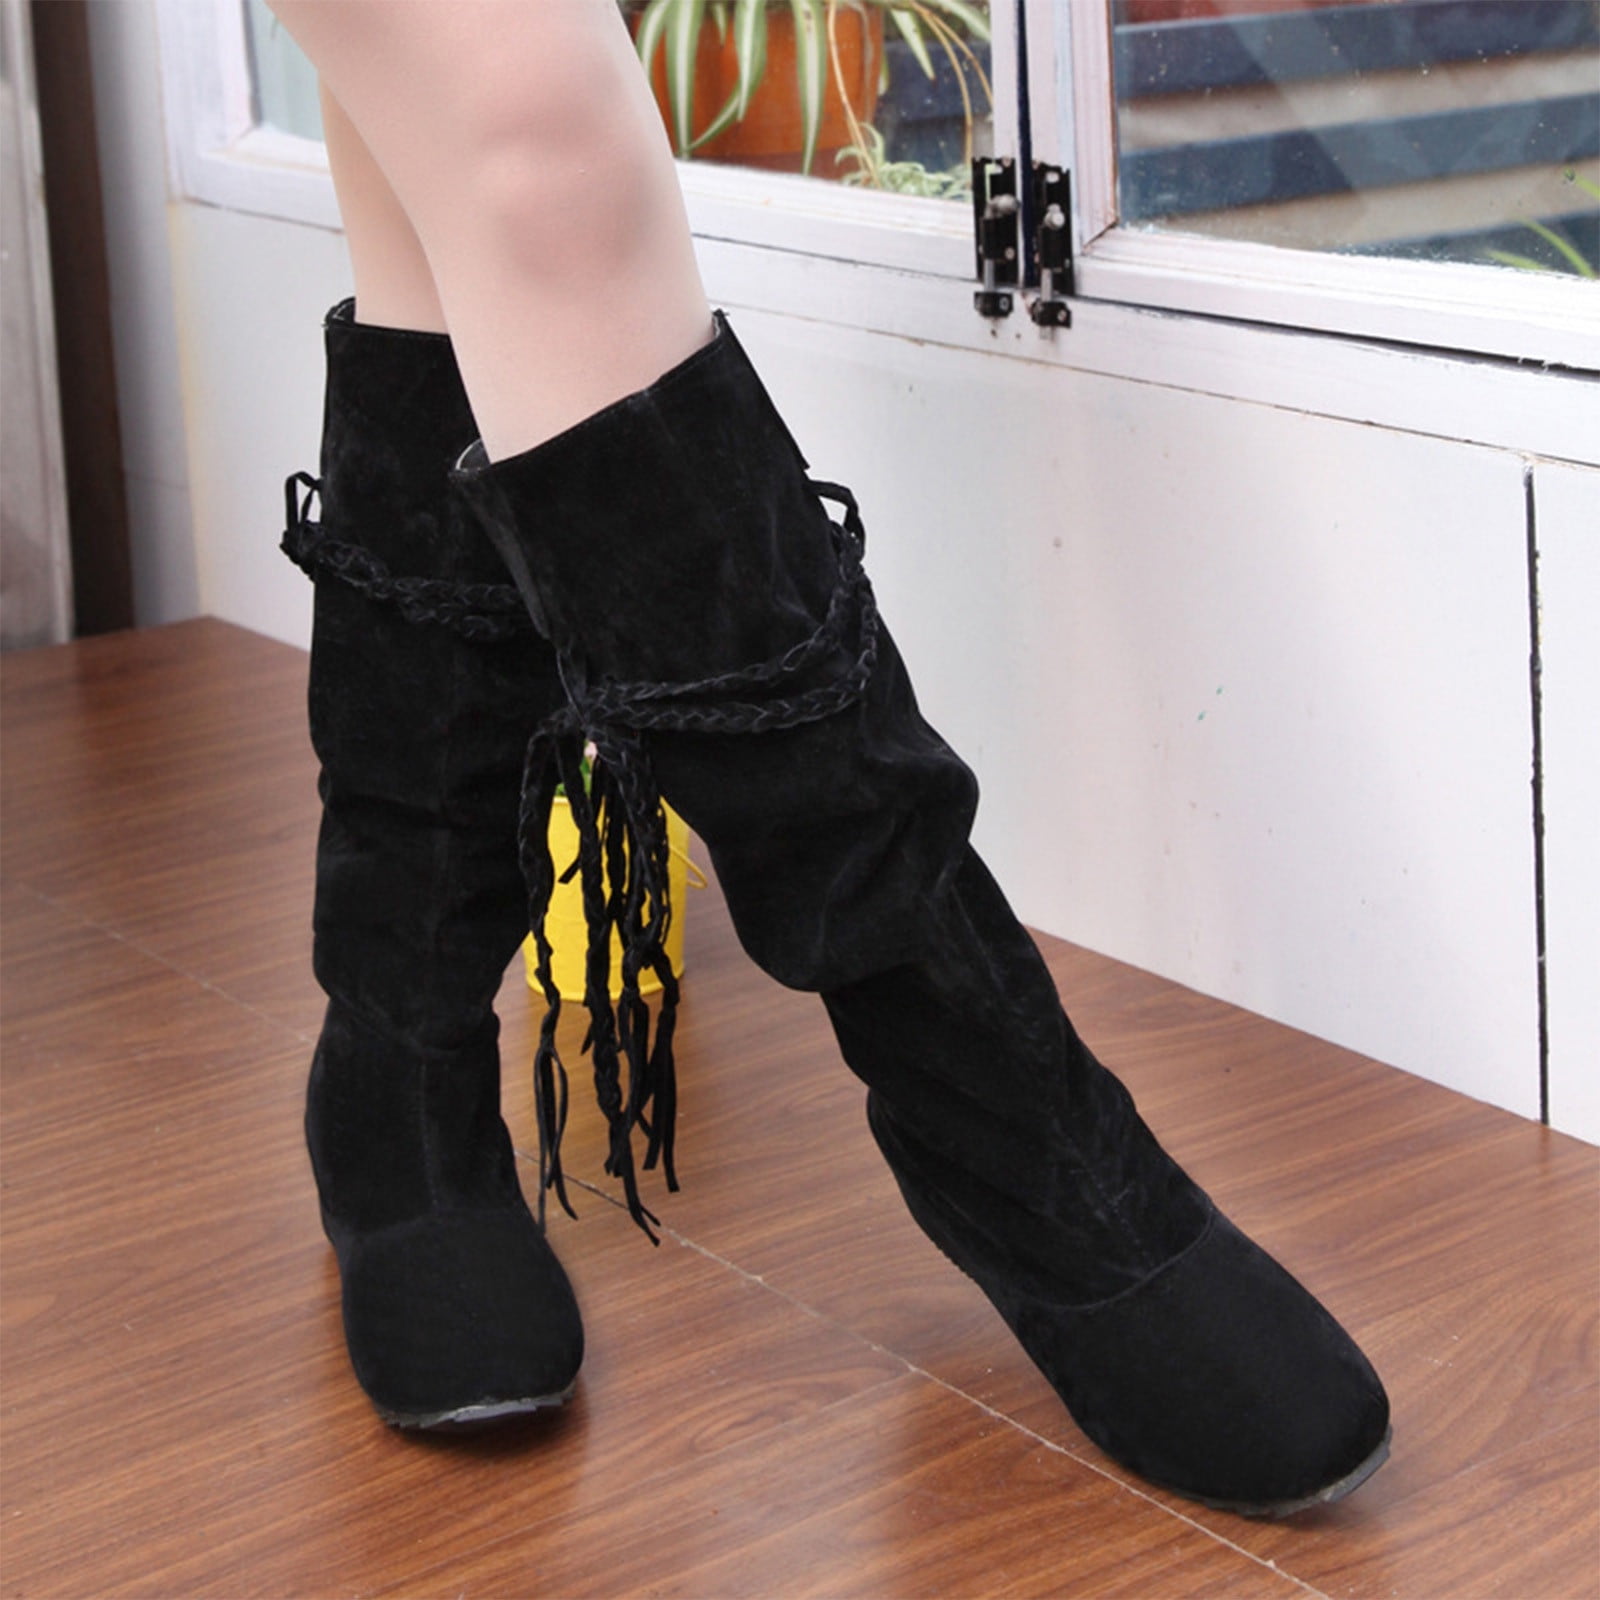 WOMENS WINTER FUR OVER THE KNEE THIGH HIGH WEDGE HEEL LADIES SUEDE SHOES BOOTS 